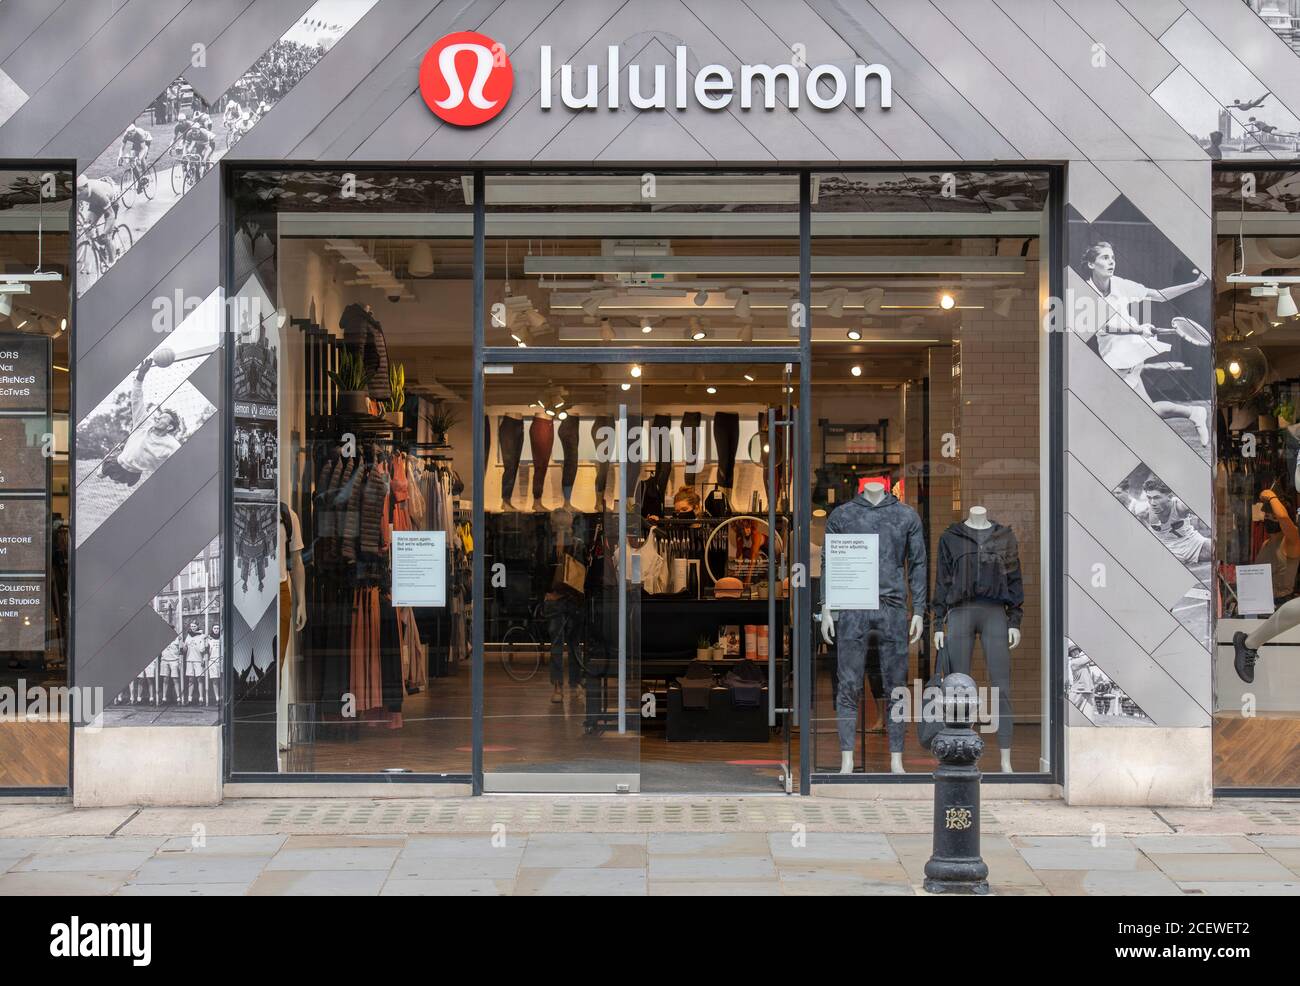 https://c8.alamy.com/comp/2CEWET2/chelsea-london-uk-2-september-2020-the-kings-road-remains-quiet-as-tourists-and-shoppers-stay-away-during-covid-19-lululemon-store-frontage-on-a-quiet-day-credit-malcolm-parkalamy-live-news-2CEWET2.jpg